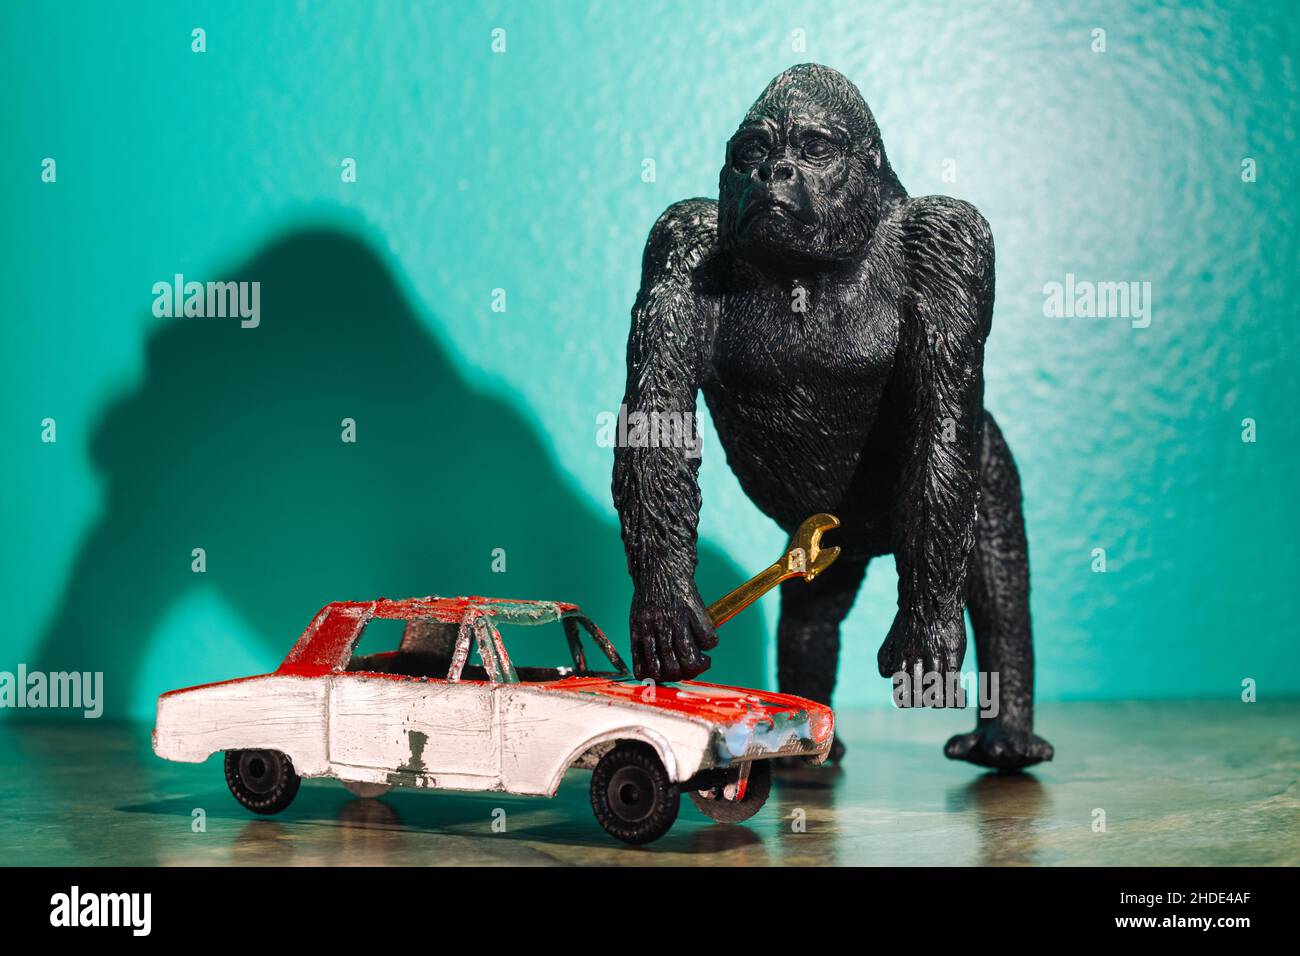 Toy gorilla holding wrench to work on old red car concept Stock Photo